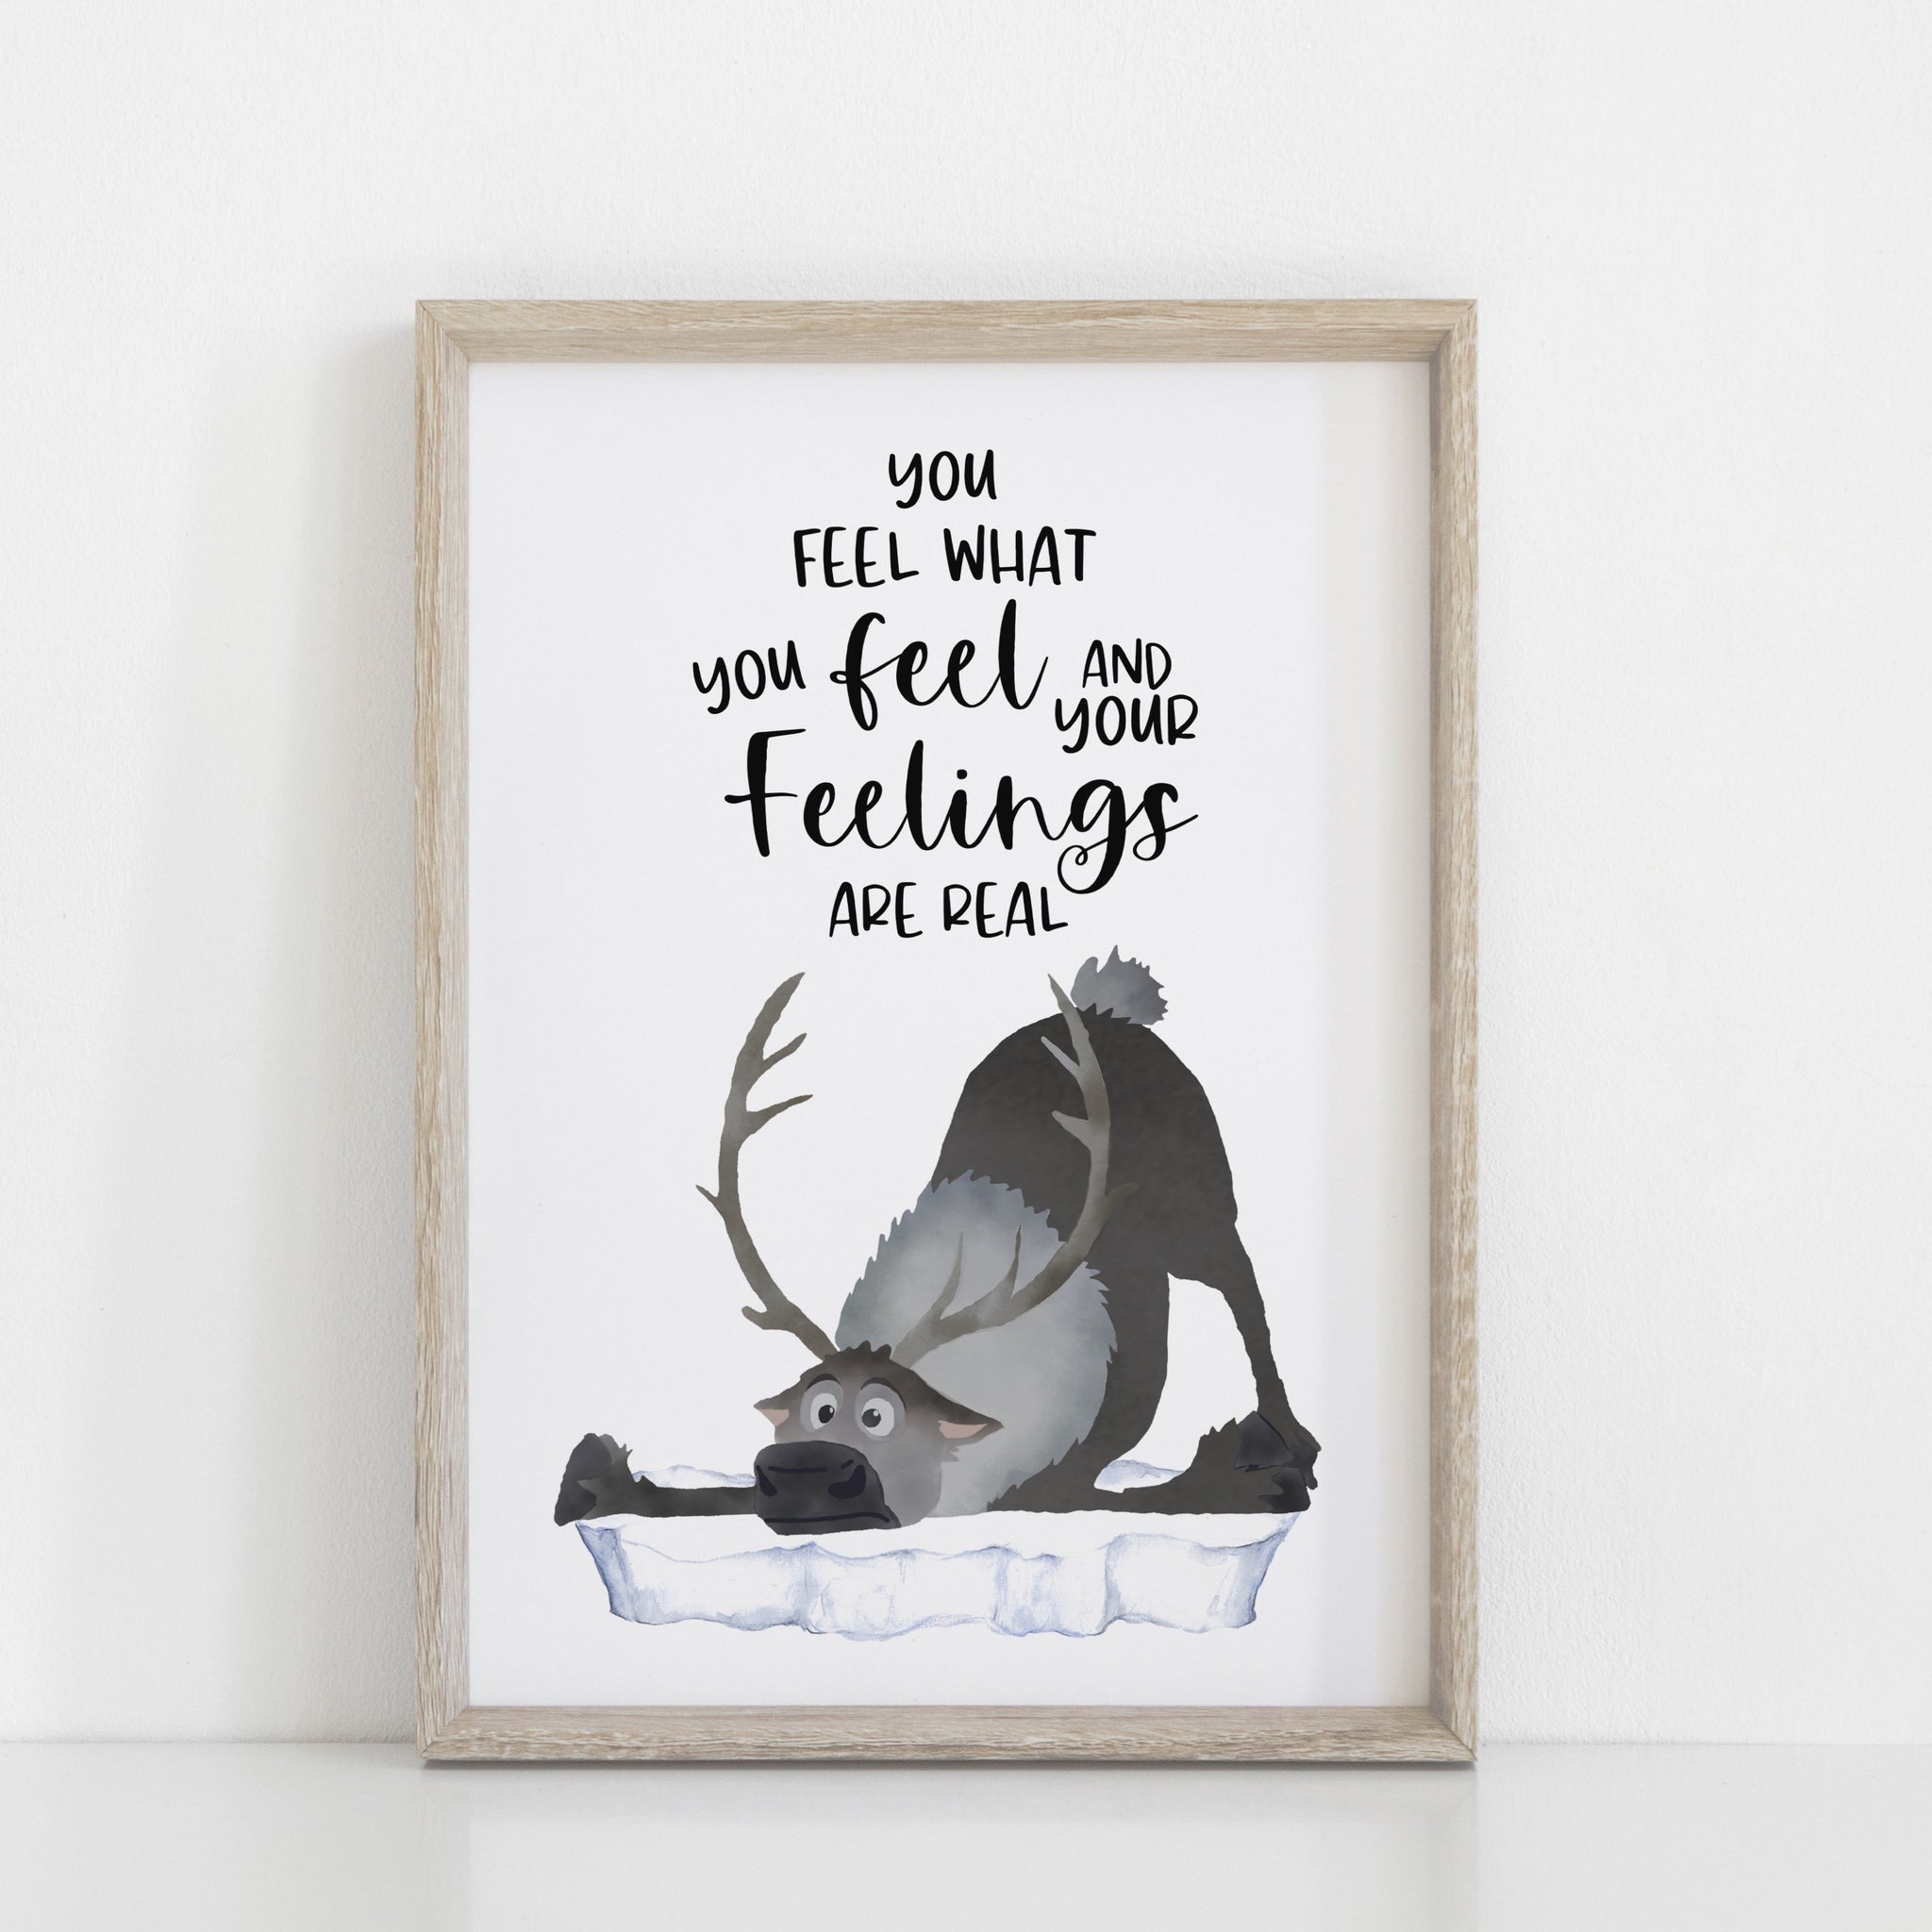 Frozen Sven Inspiration Quote Wall Print, You Feel What You Feel, Disney Wall Art, Kids Bedroom Decor